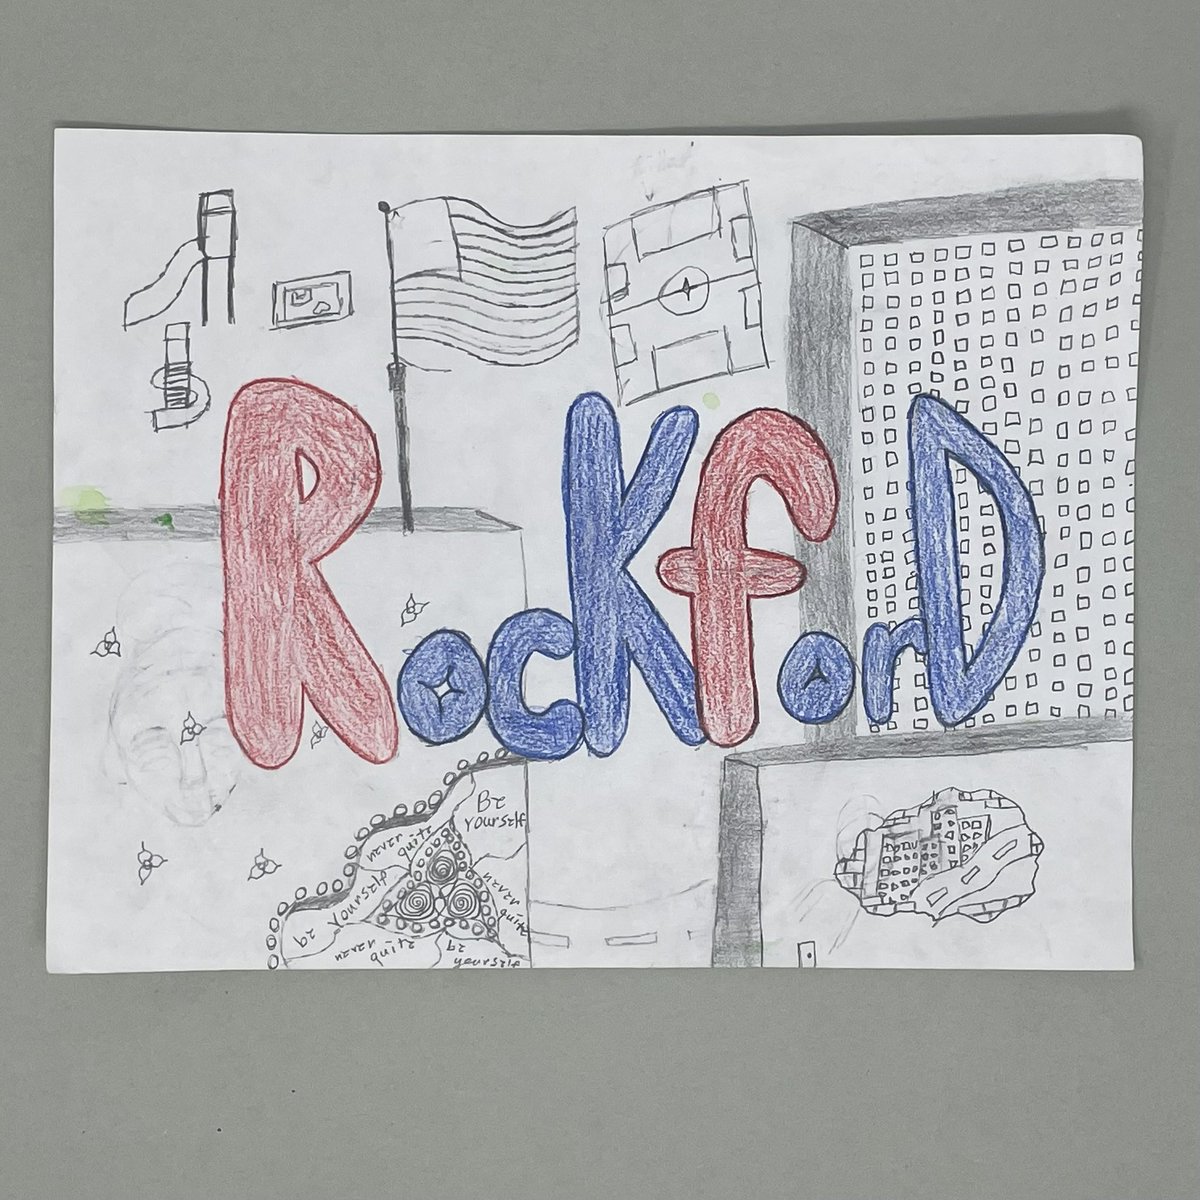 Scholars recently created tourism advertisements. I encouraged them to include symbols that represented their chosen city’s best food, places and/or activities. 

I loved seeing so many different illustrations of our very own Rockford! Check them out! #gorockford #arteducation